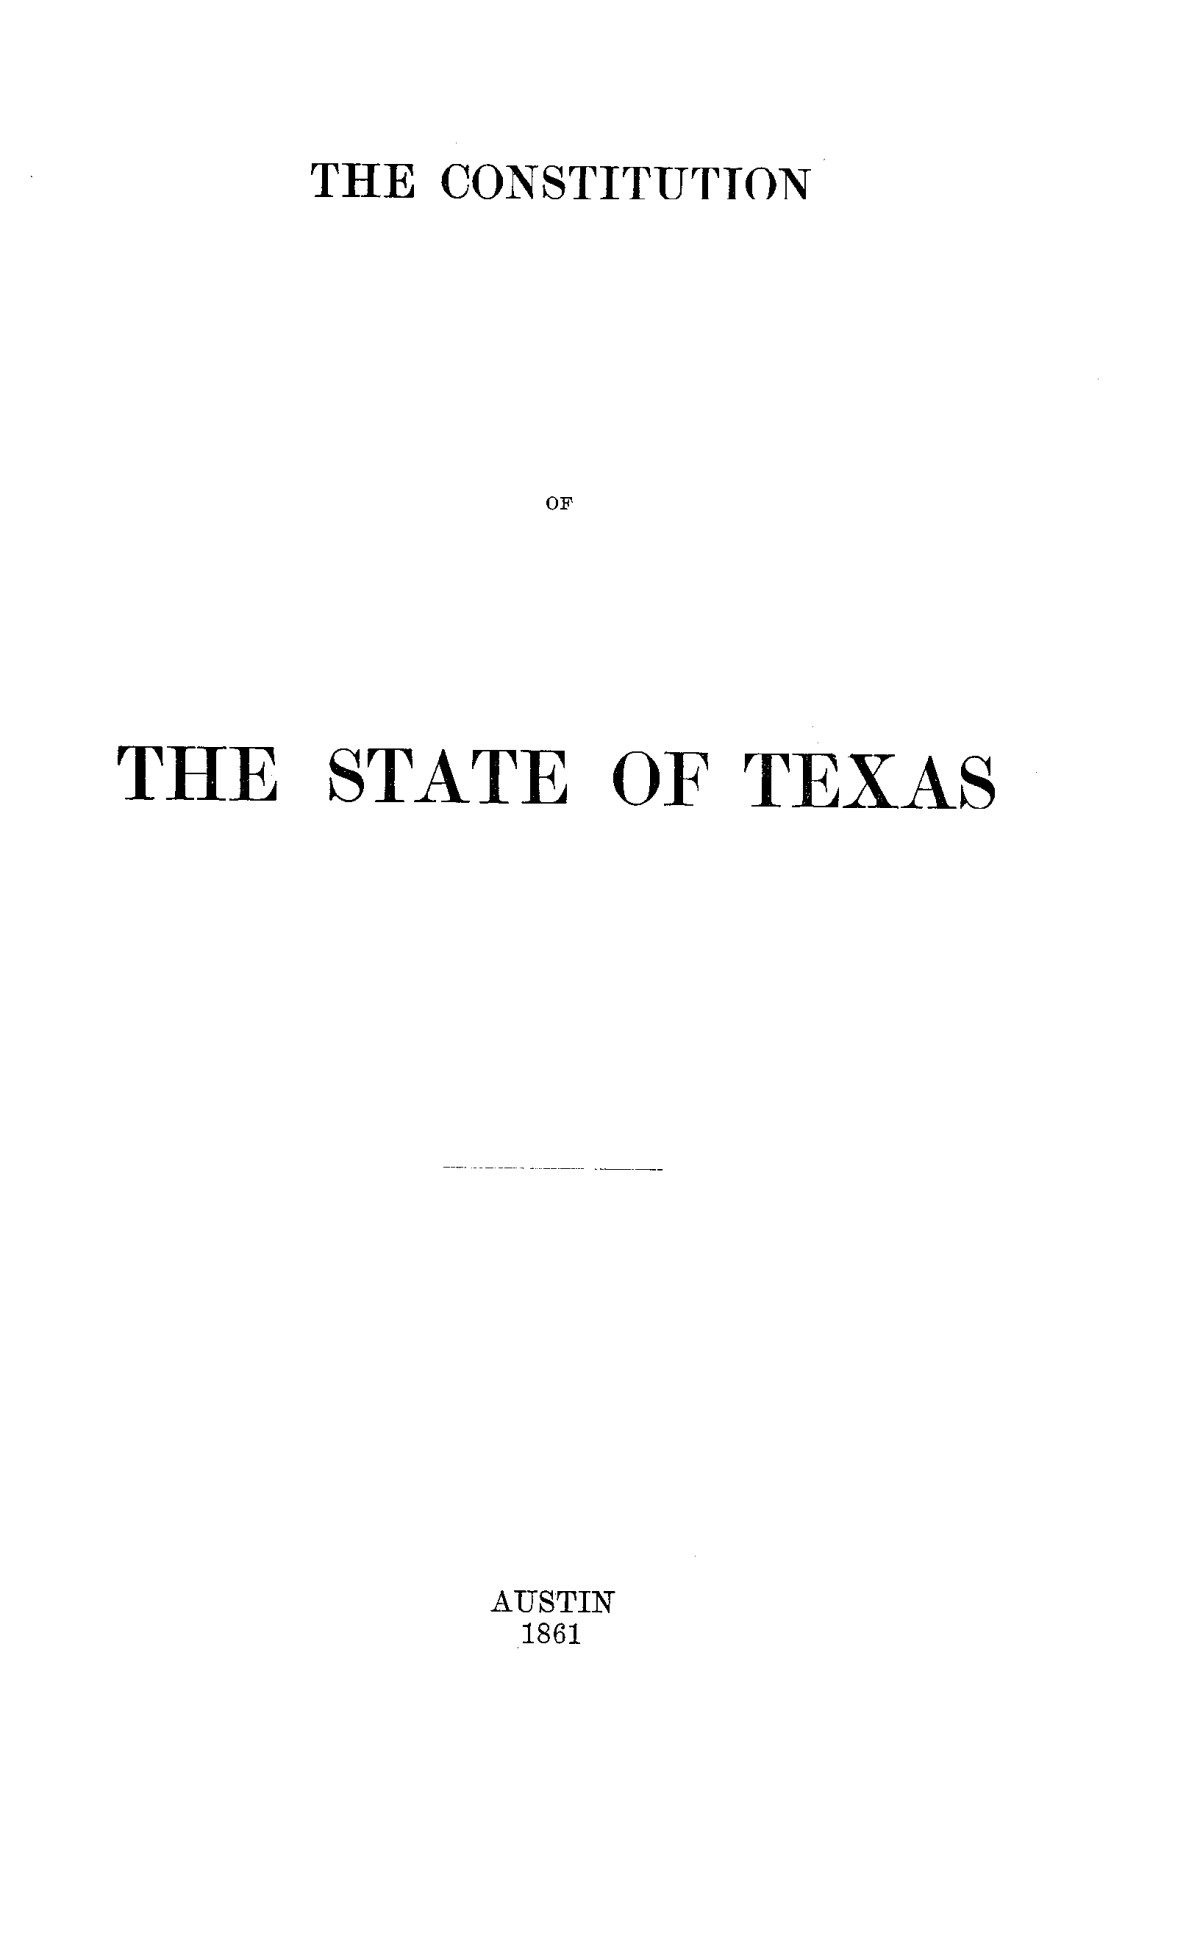 The Laws of Texas, 1822-1897 Volume 5
                                                
                                                    1
                                                